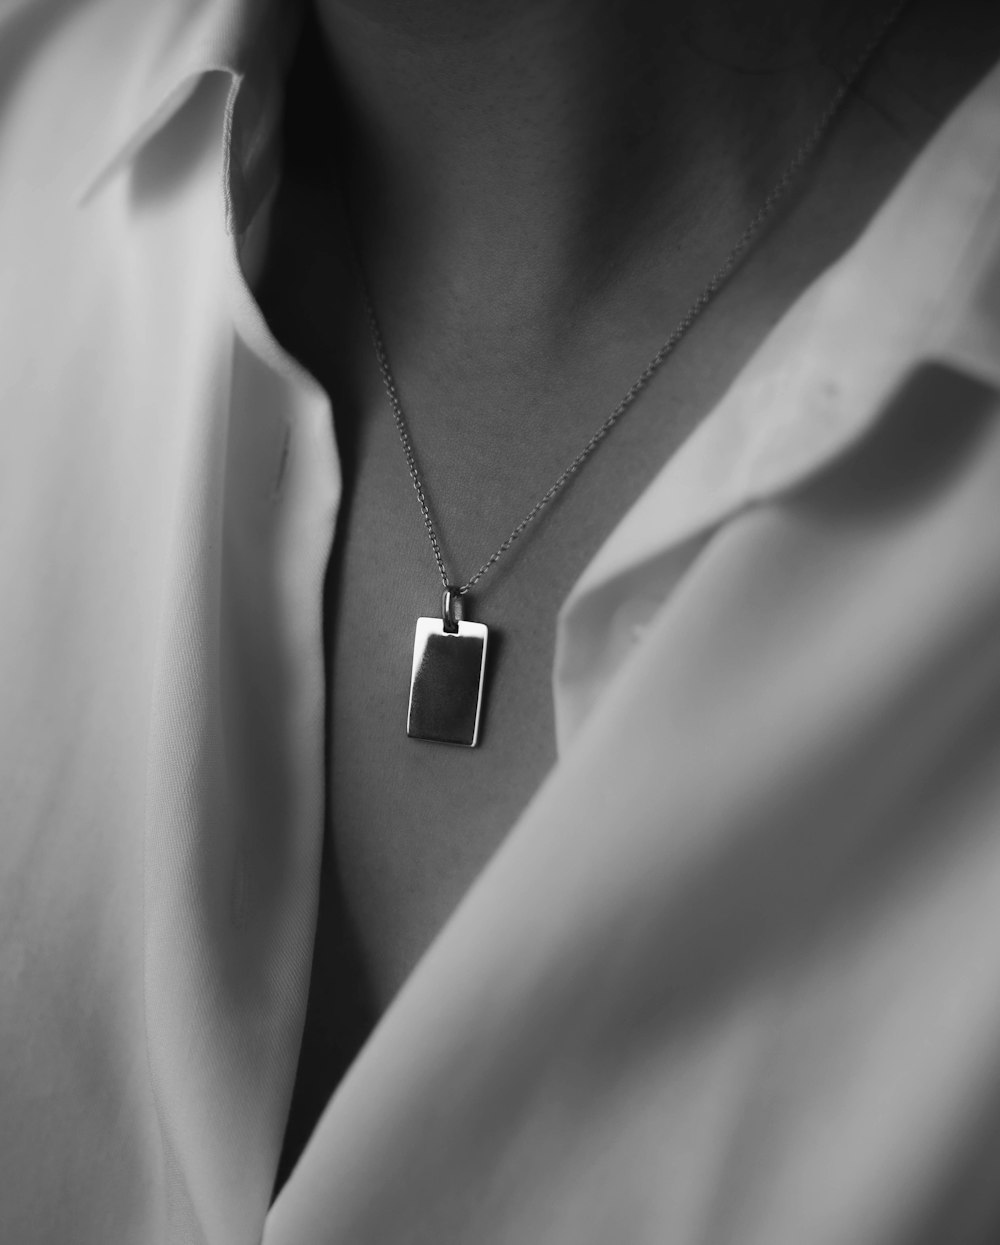 person wearing silver necklace with heart pendant